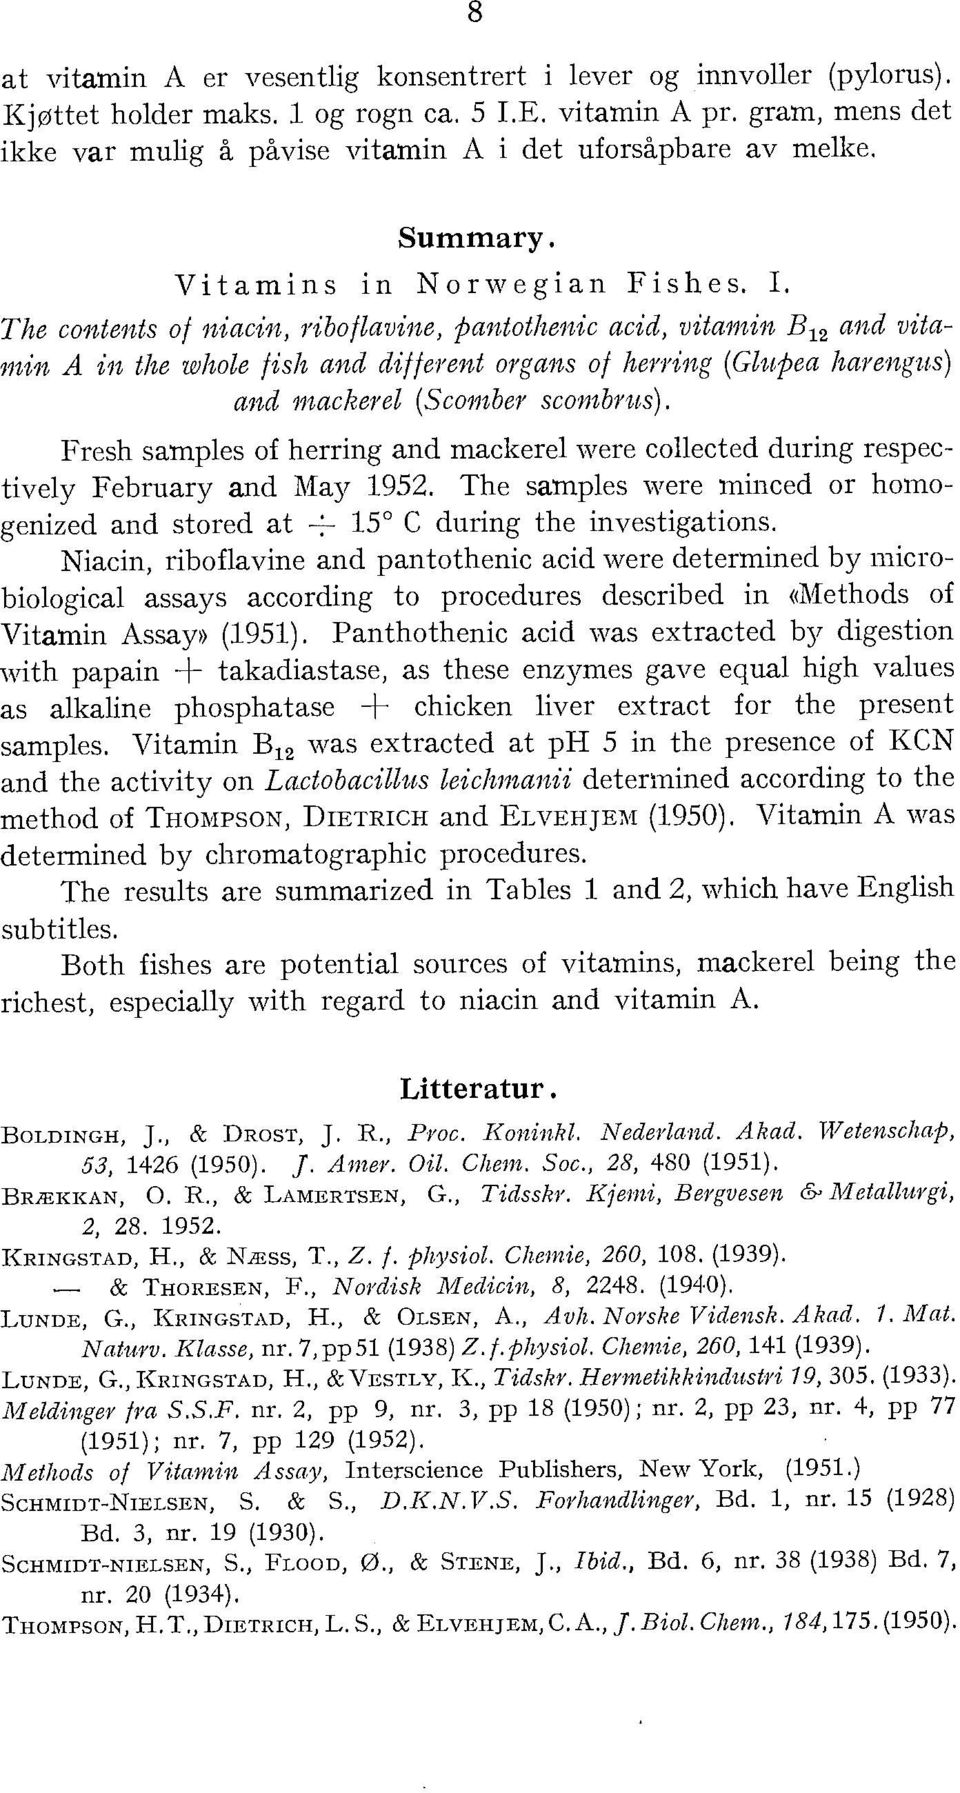 The contents of niacin, ribofavine, pantothenic acid, vitamin B 12 and vitamin A in the whoe fish and different organs of herring (Gupea harengus) and mackere (Scomber scombrus).